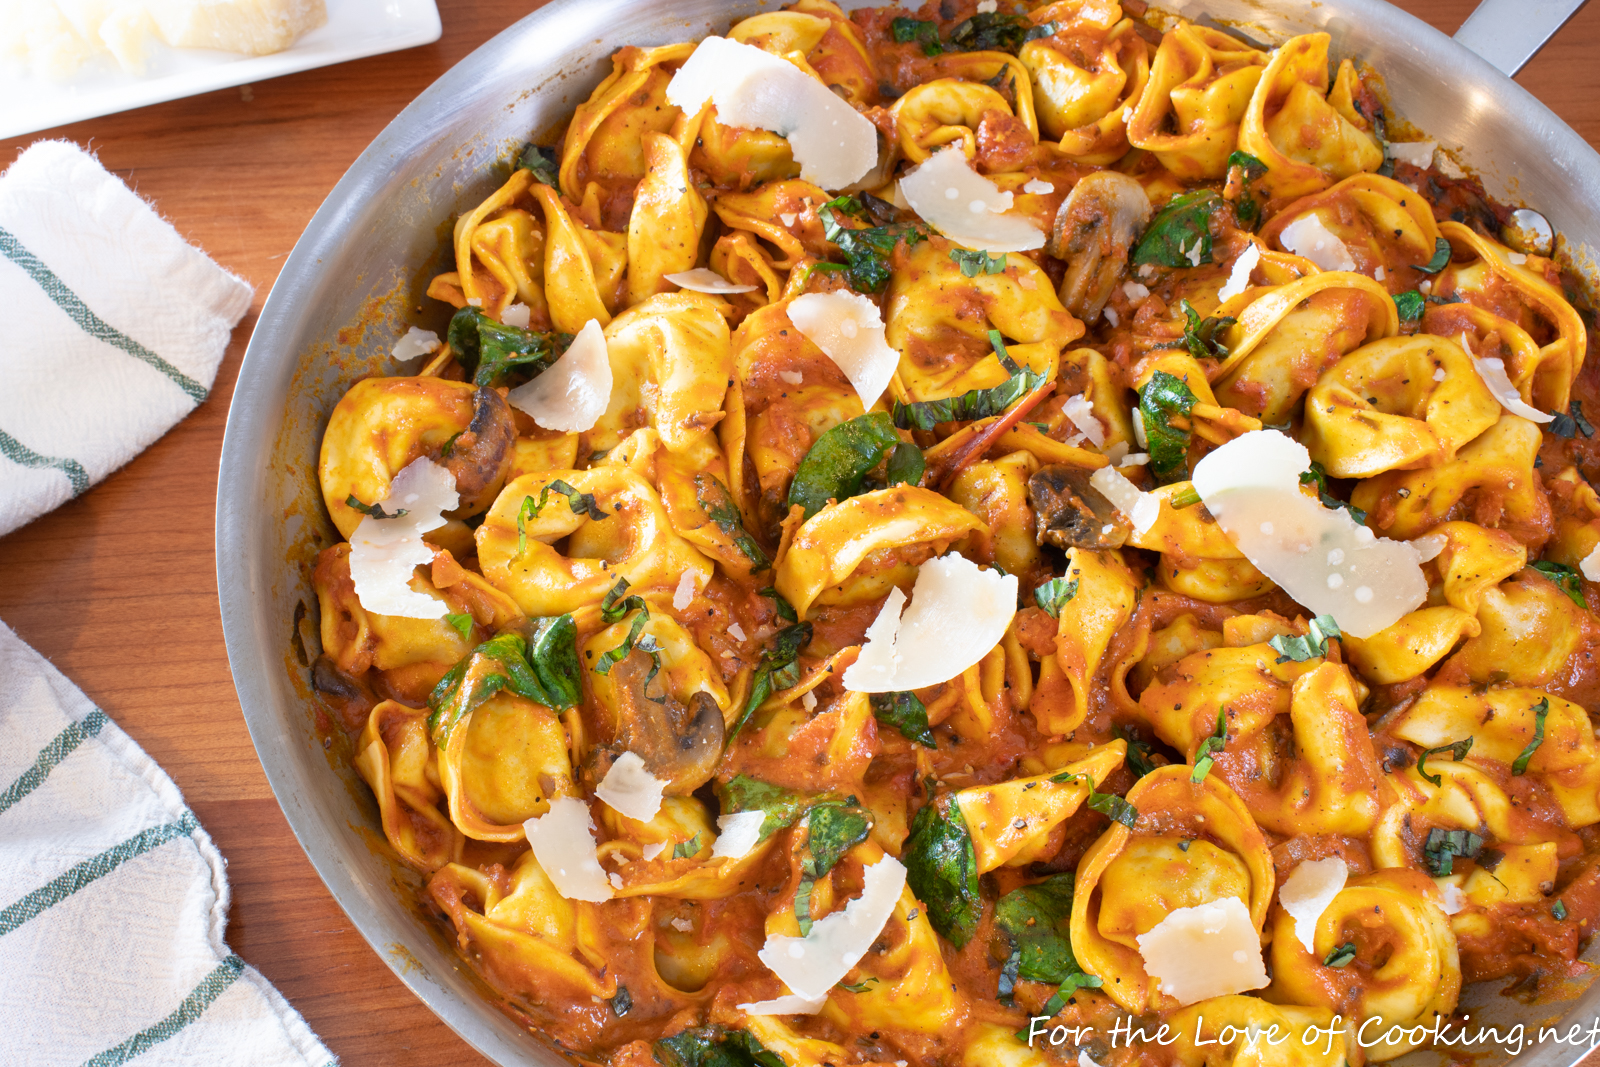 Italian Sausage Tortellini Skillet with Mushrooms and Spinach in a Creamy Tomato Sauce